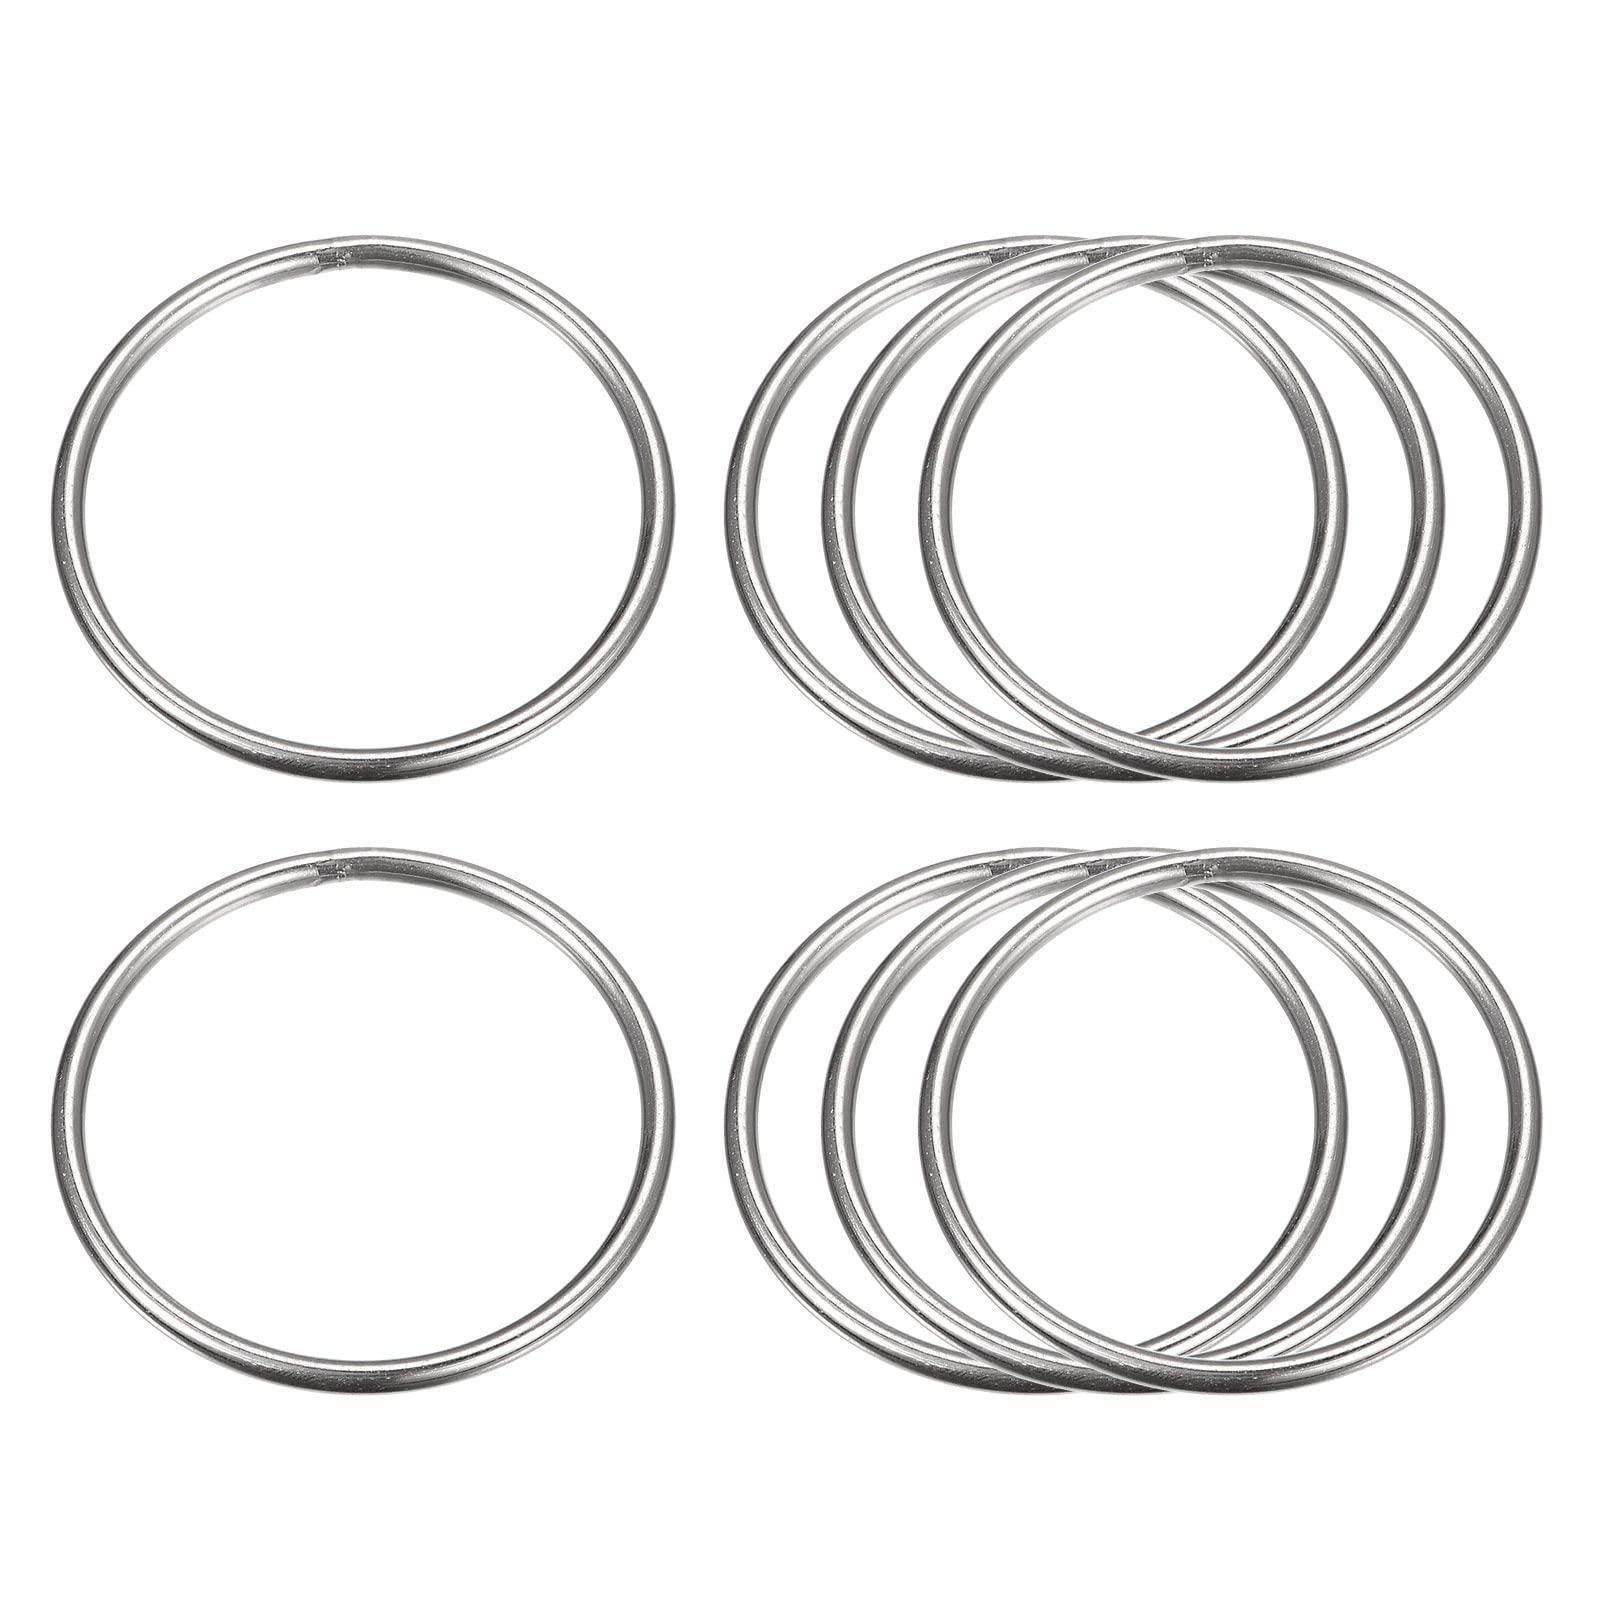 sourcing map Stainless Steel O Rings, 8pcs 50mm(1.97") Outer Dia. 3mm Thickness Multi-Purpose Metal Welded O-rings Round Rings for Hardware Luggage Accessories